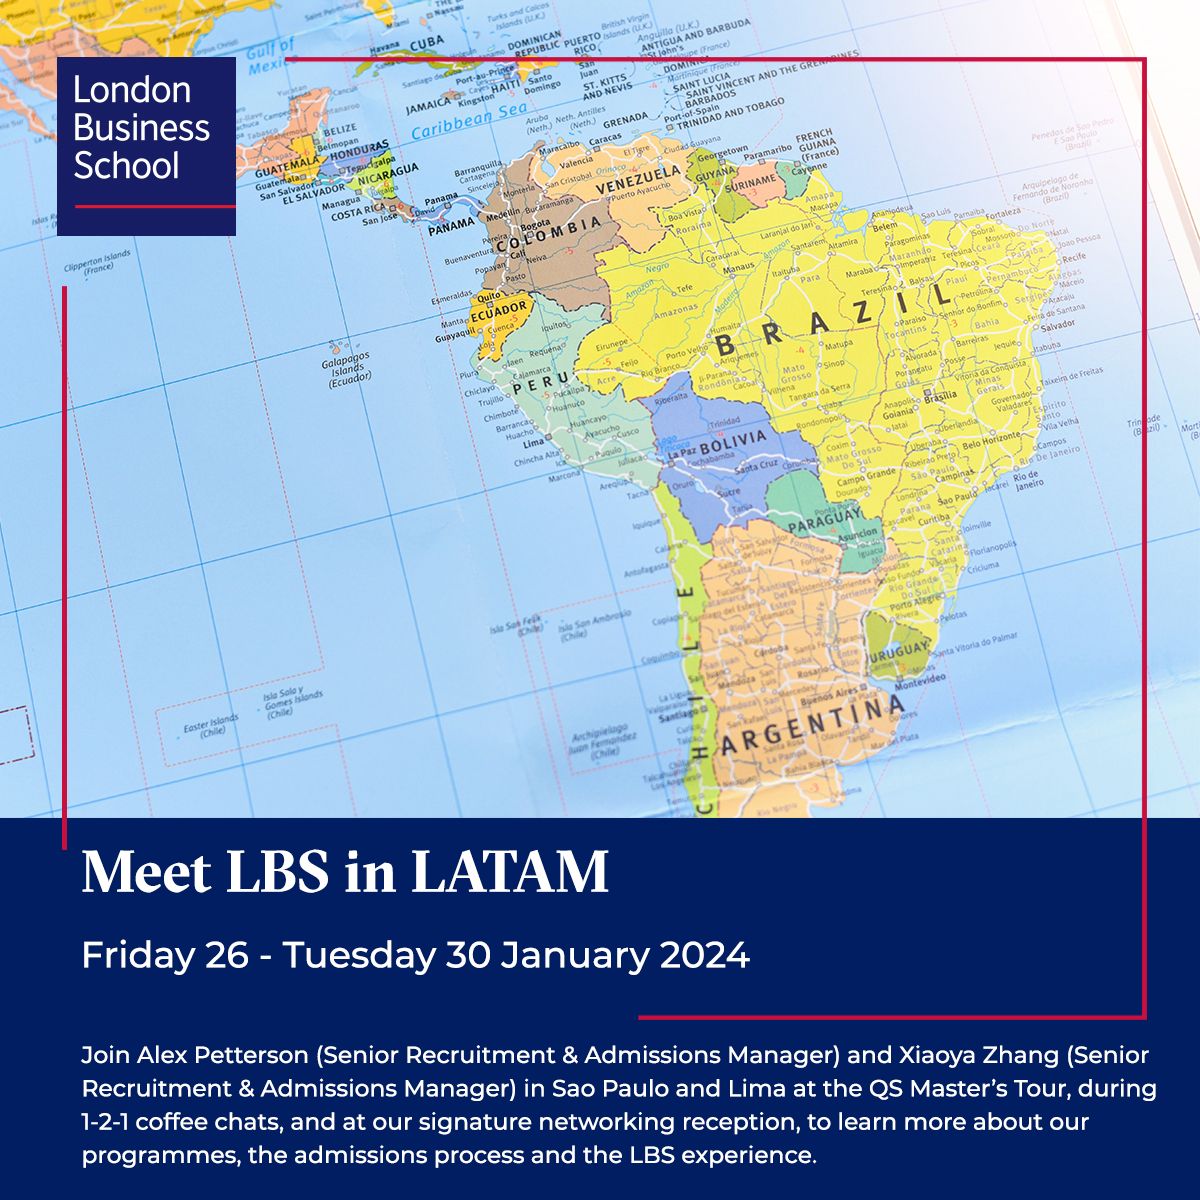 Rosa Rodríguez on LinkedIn: Amazing opportunity to meet LBS in Lima!